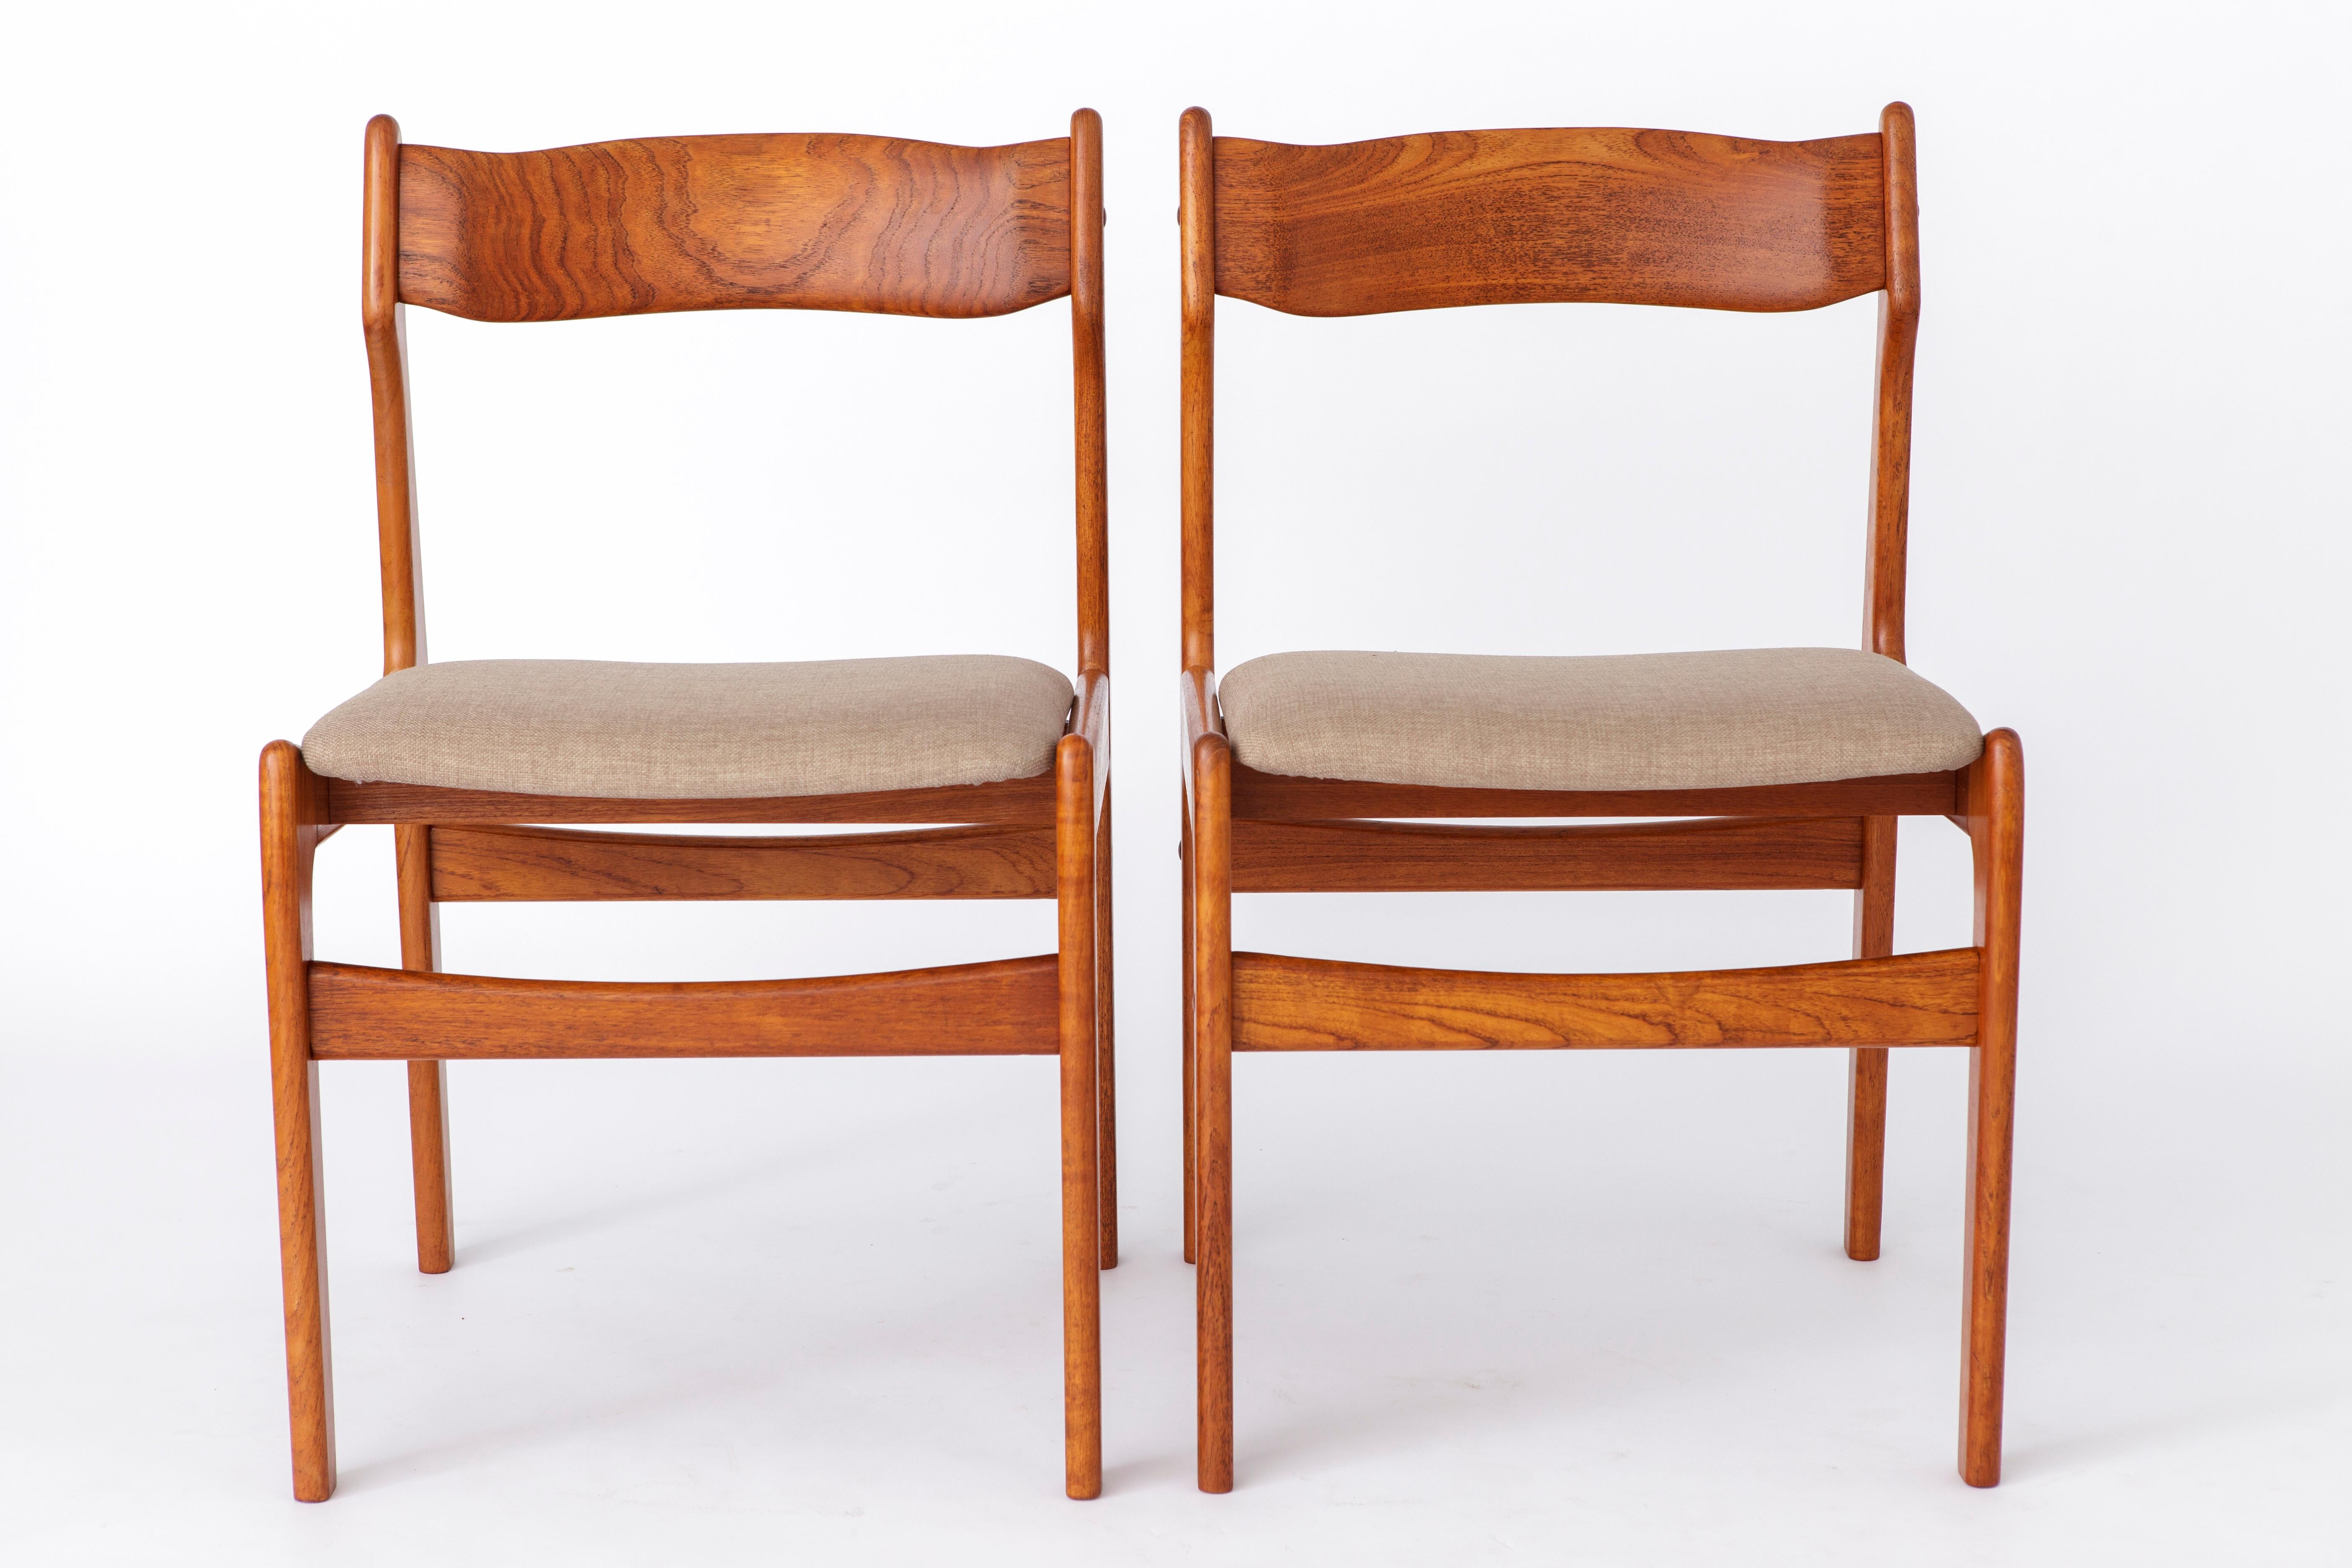 Mid-Century Modern 2 of 5 Vintage Danish Chairs 1960s - Walnut Chair Frame For Sale